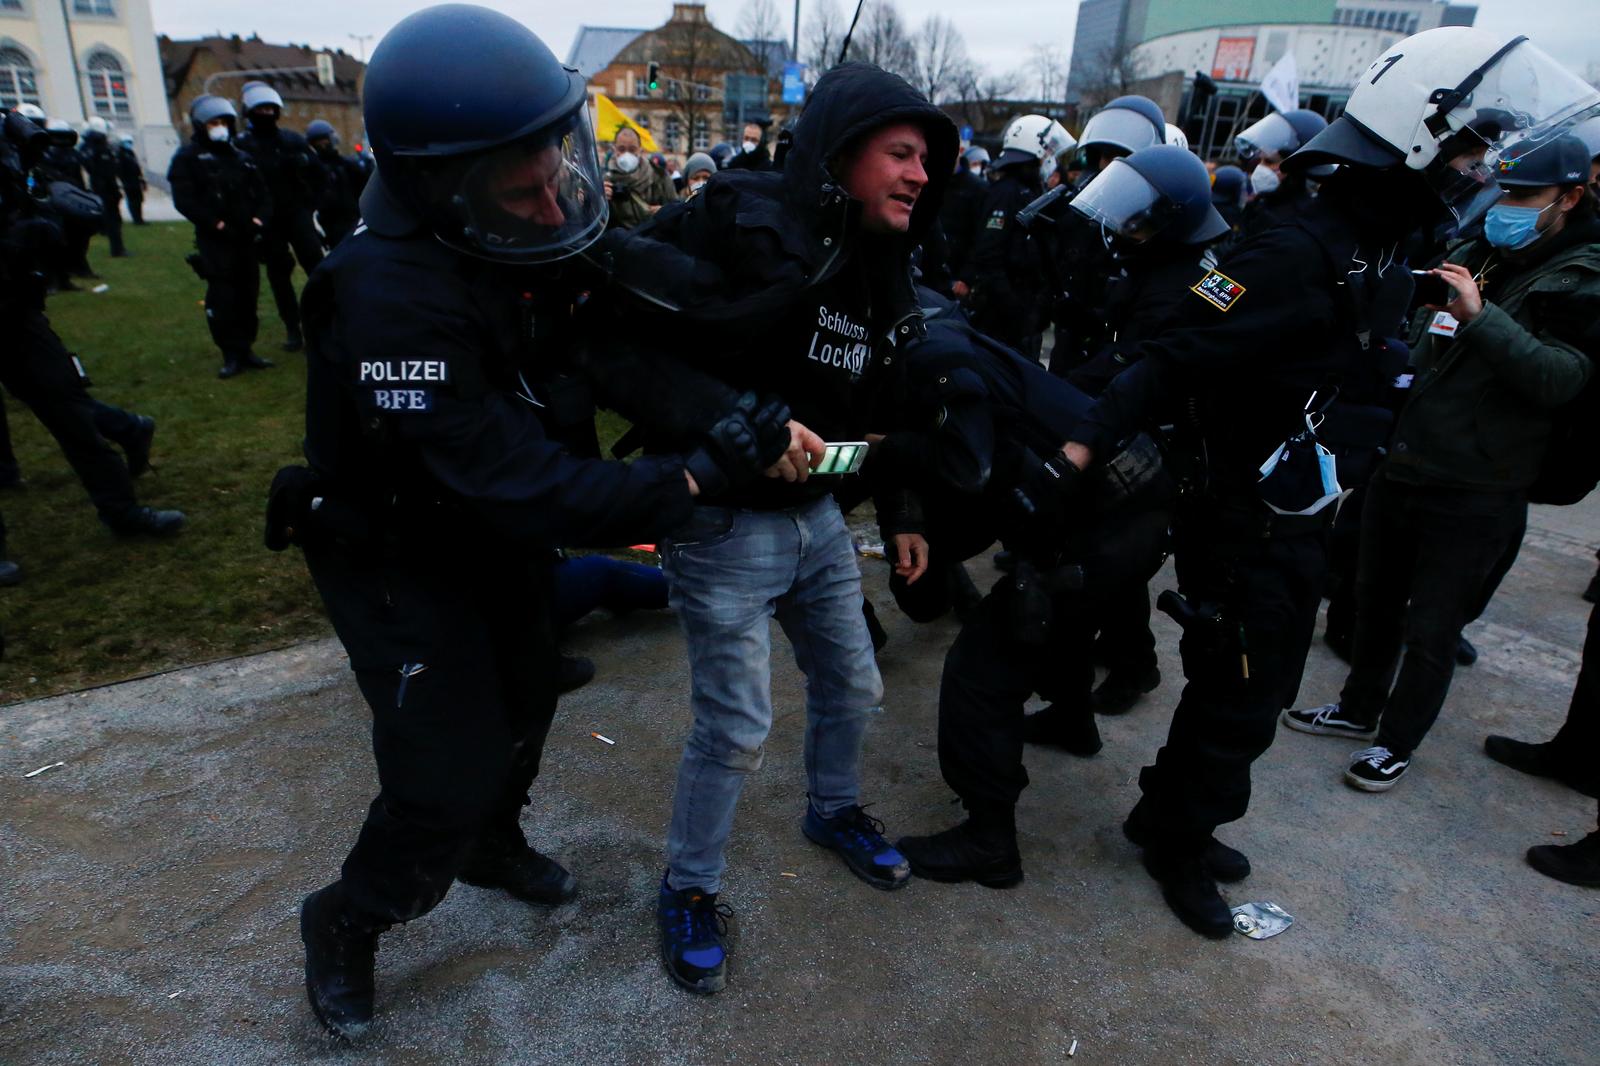 Police use water cannon as German lockdown protest turns violent